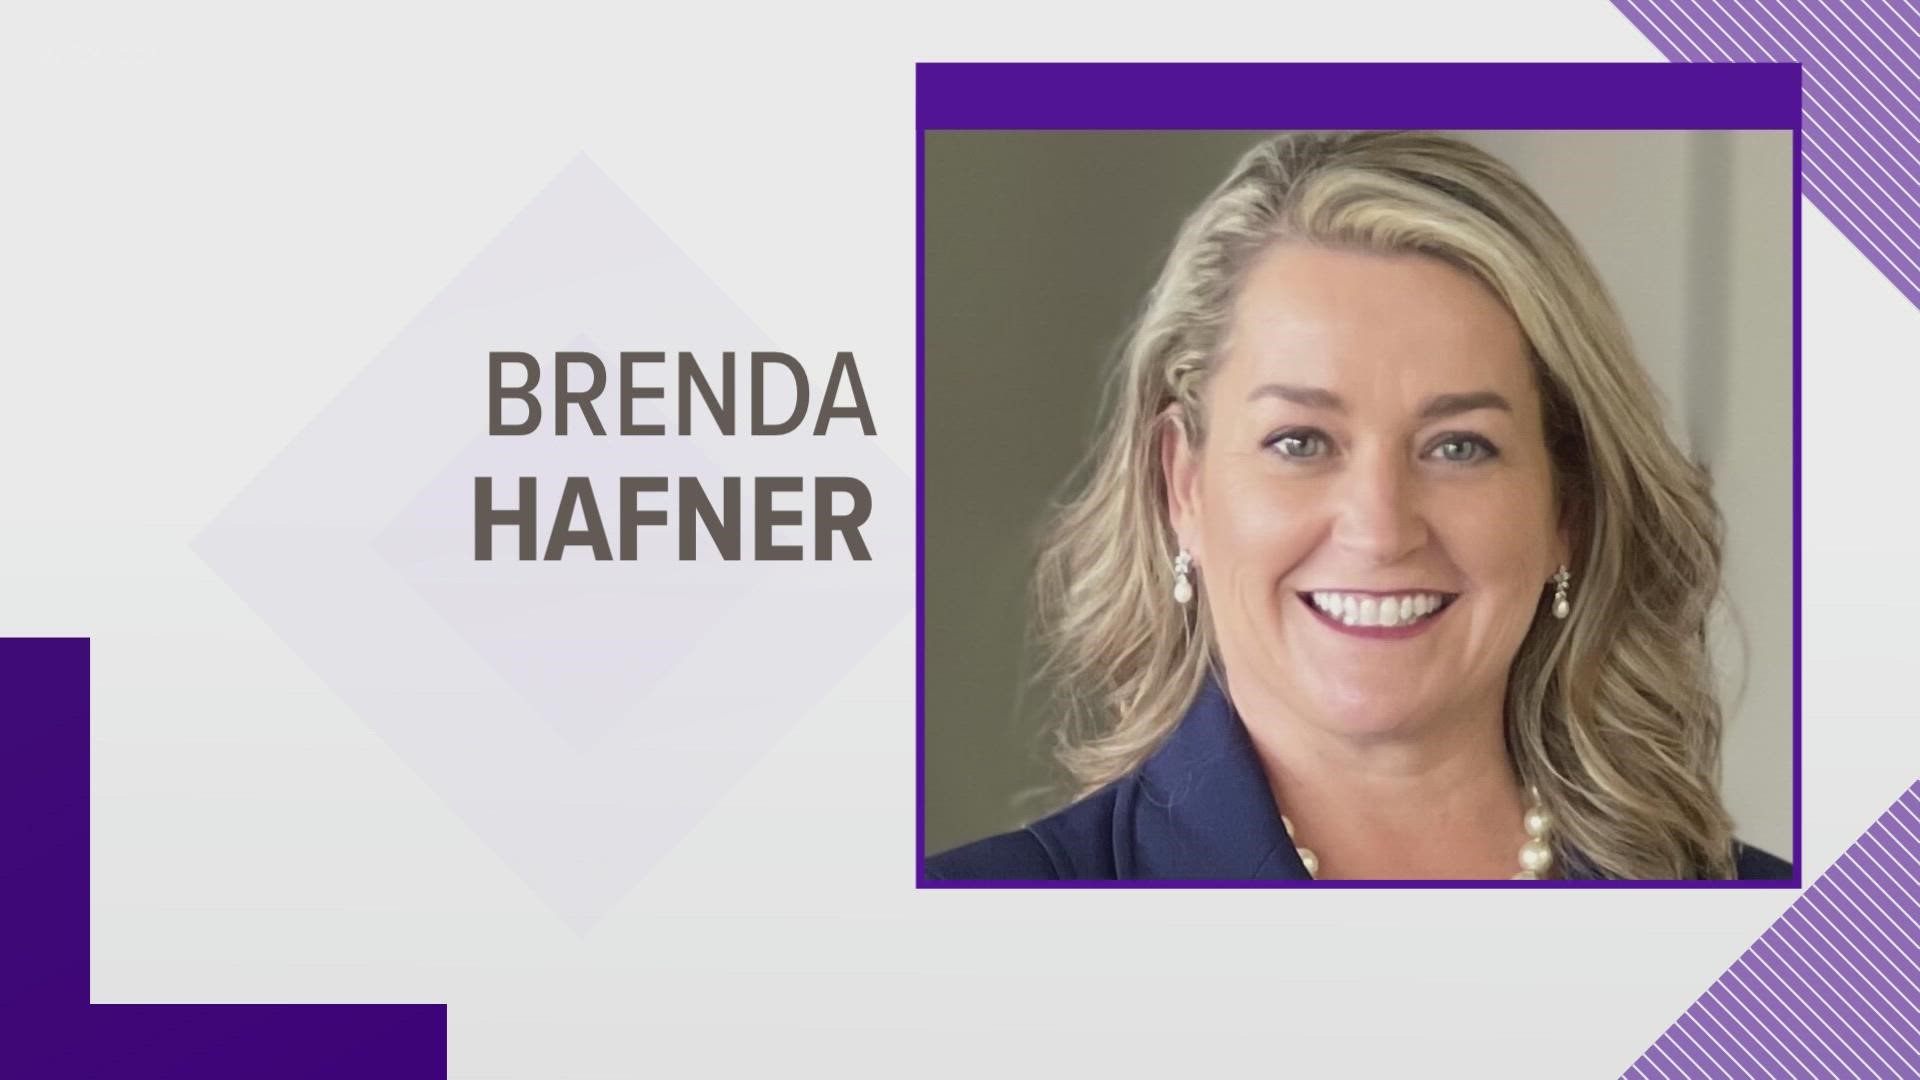 Dr. Brenda Hafner has held positions ranging from teacher to assistant superintendent in school systems across the Midlands since she began her career in 1998.